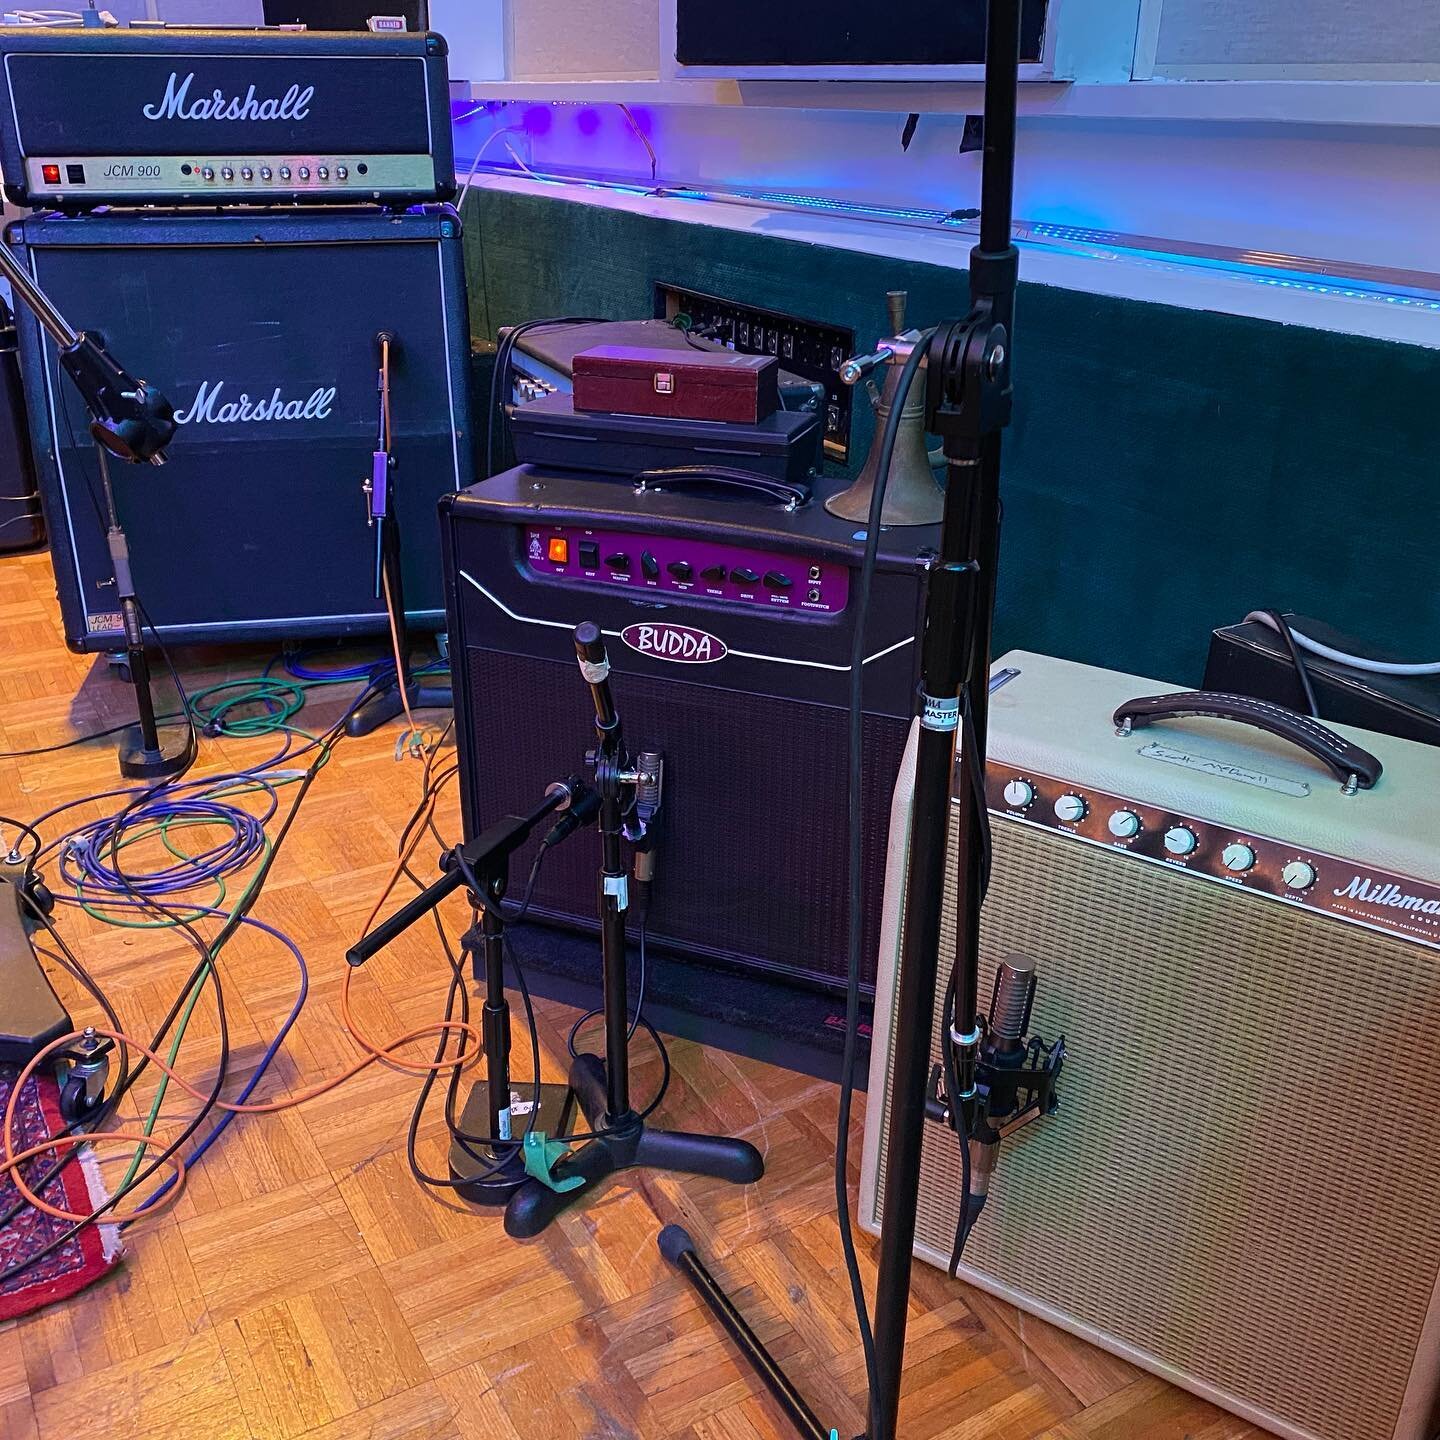 Had some killer amps for our session and of course it killer tones! 
:
:
:
:
@marshallamps_uk @milkmansound  #buddaamps